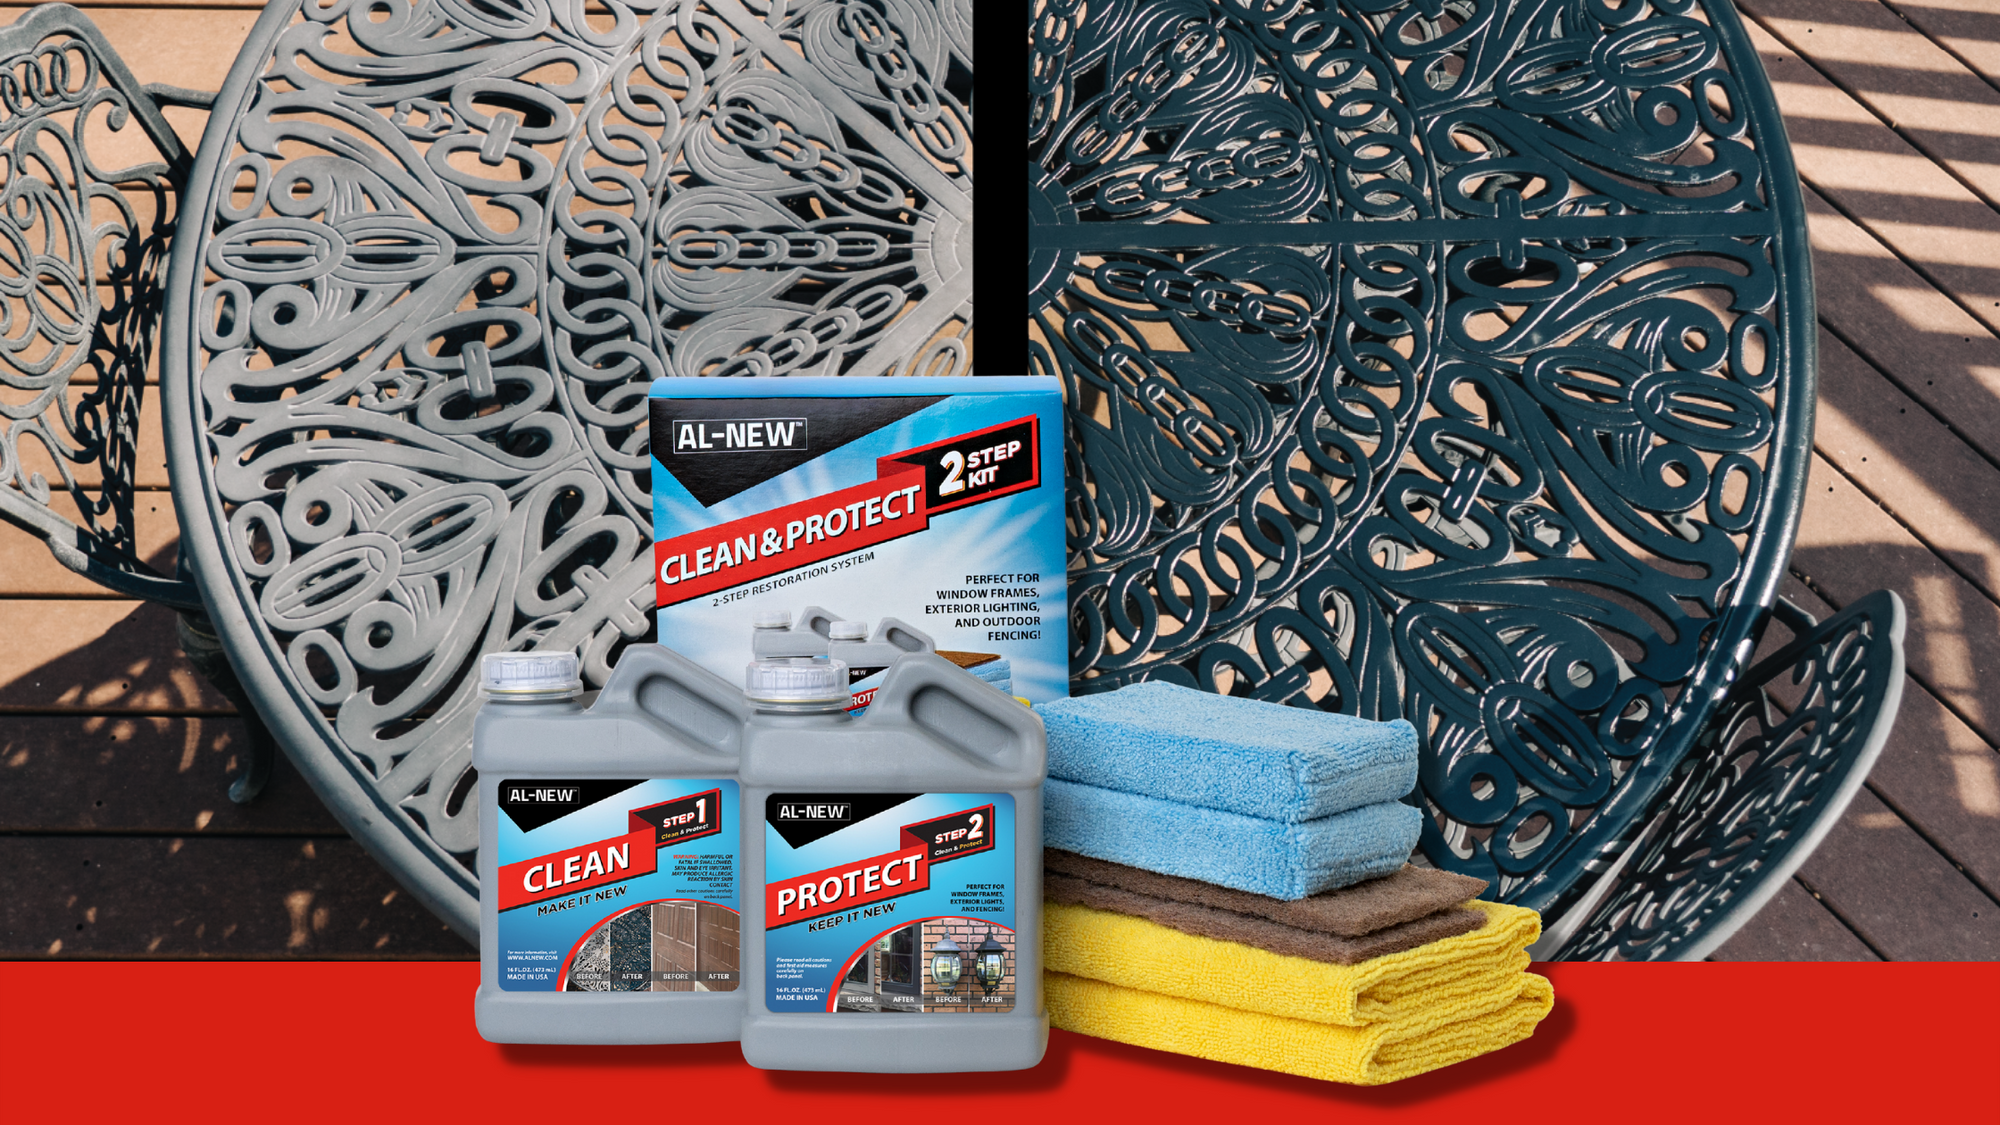 All About The AL-NEW 2-Step Clean & Protect Kit